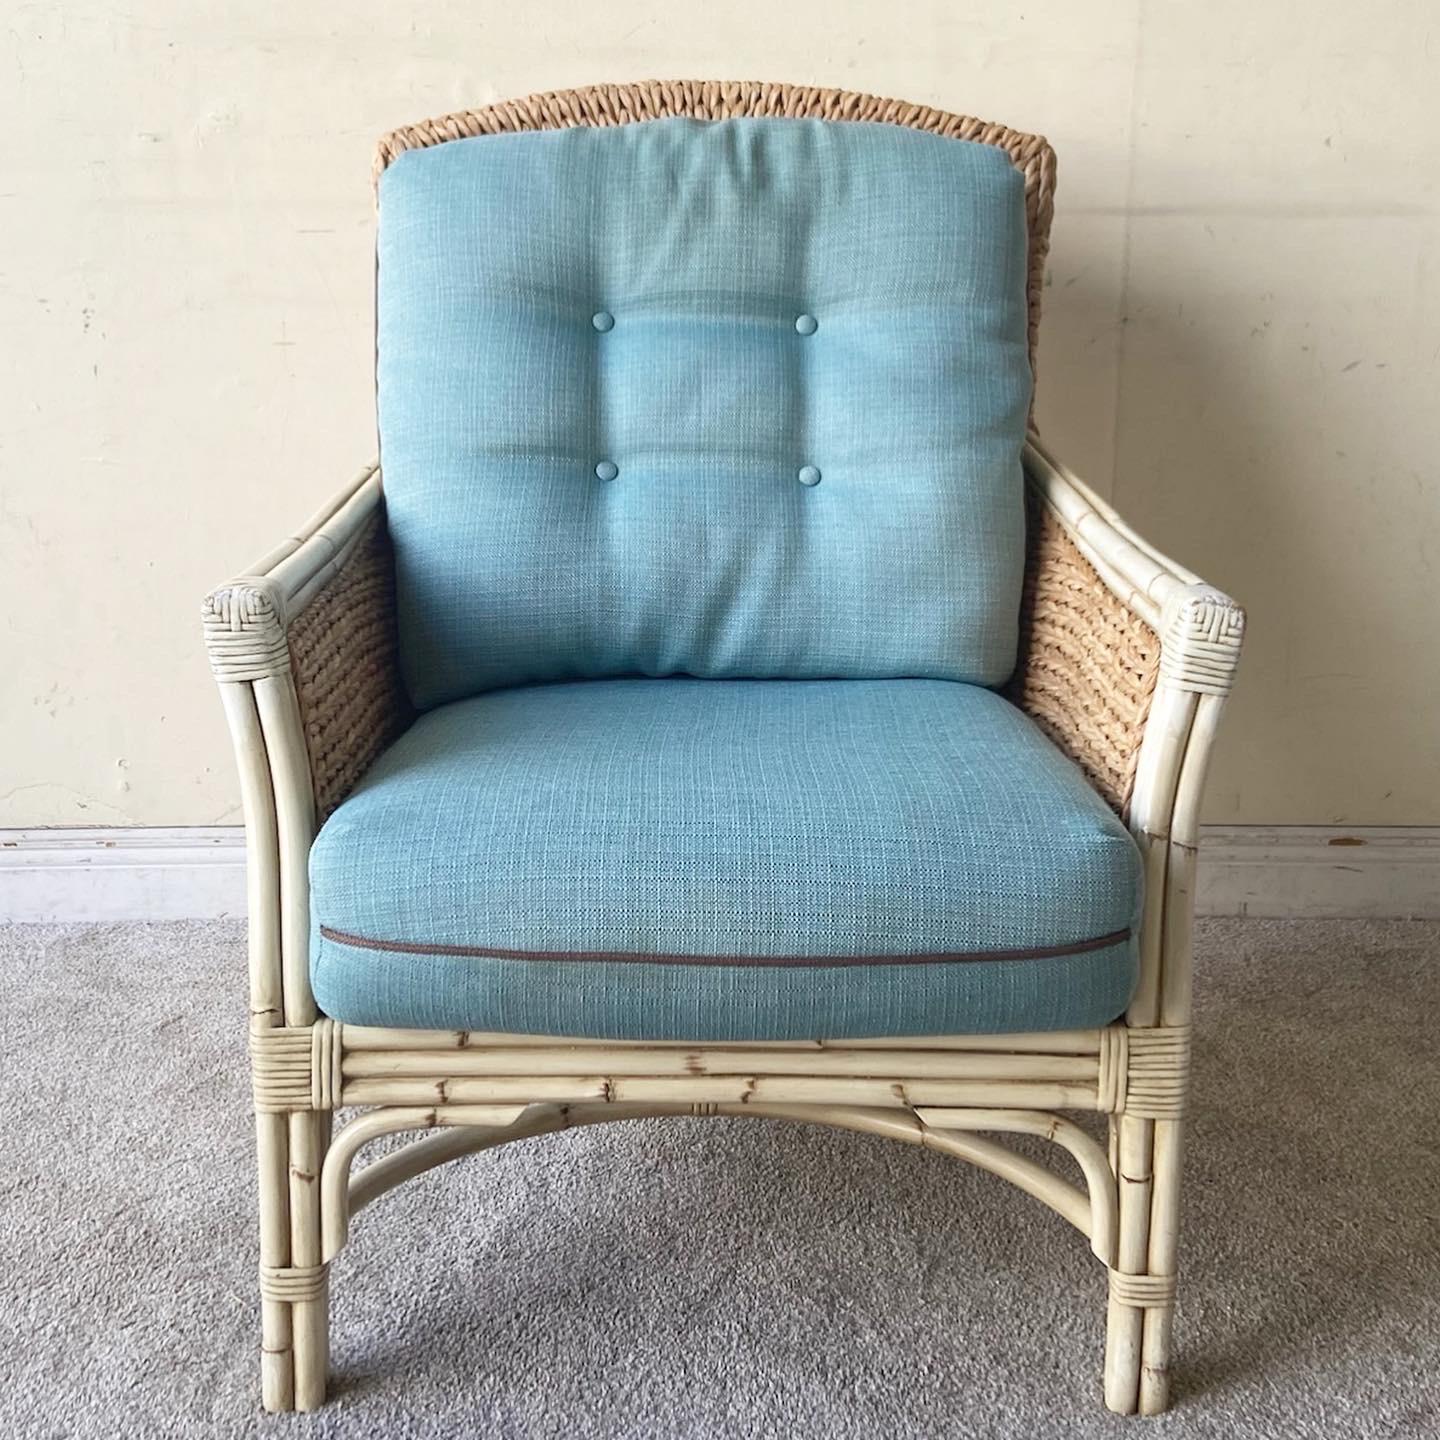 Exceptional vintage bohemian lounge chair with matching ottoman. Each feature a painted bamboo and rattan frame with hand woven seagrass through the pieces and blue cushions.

Foot rest measures 25”W, 18.5”D, 16.5”H.